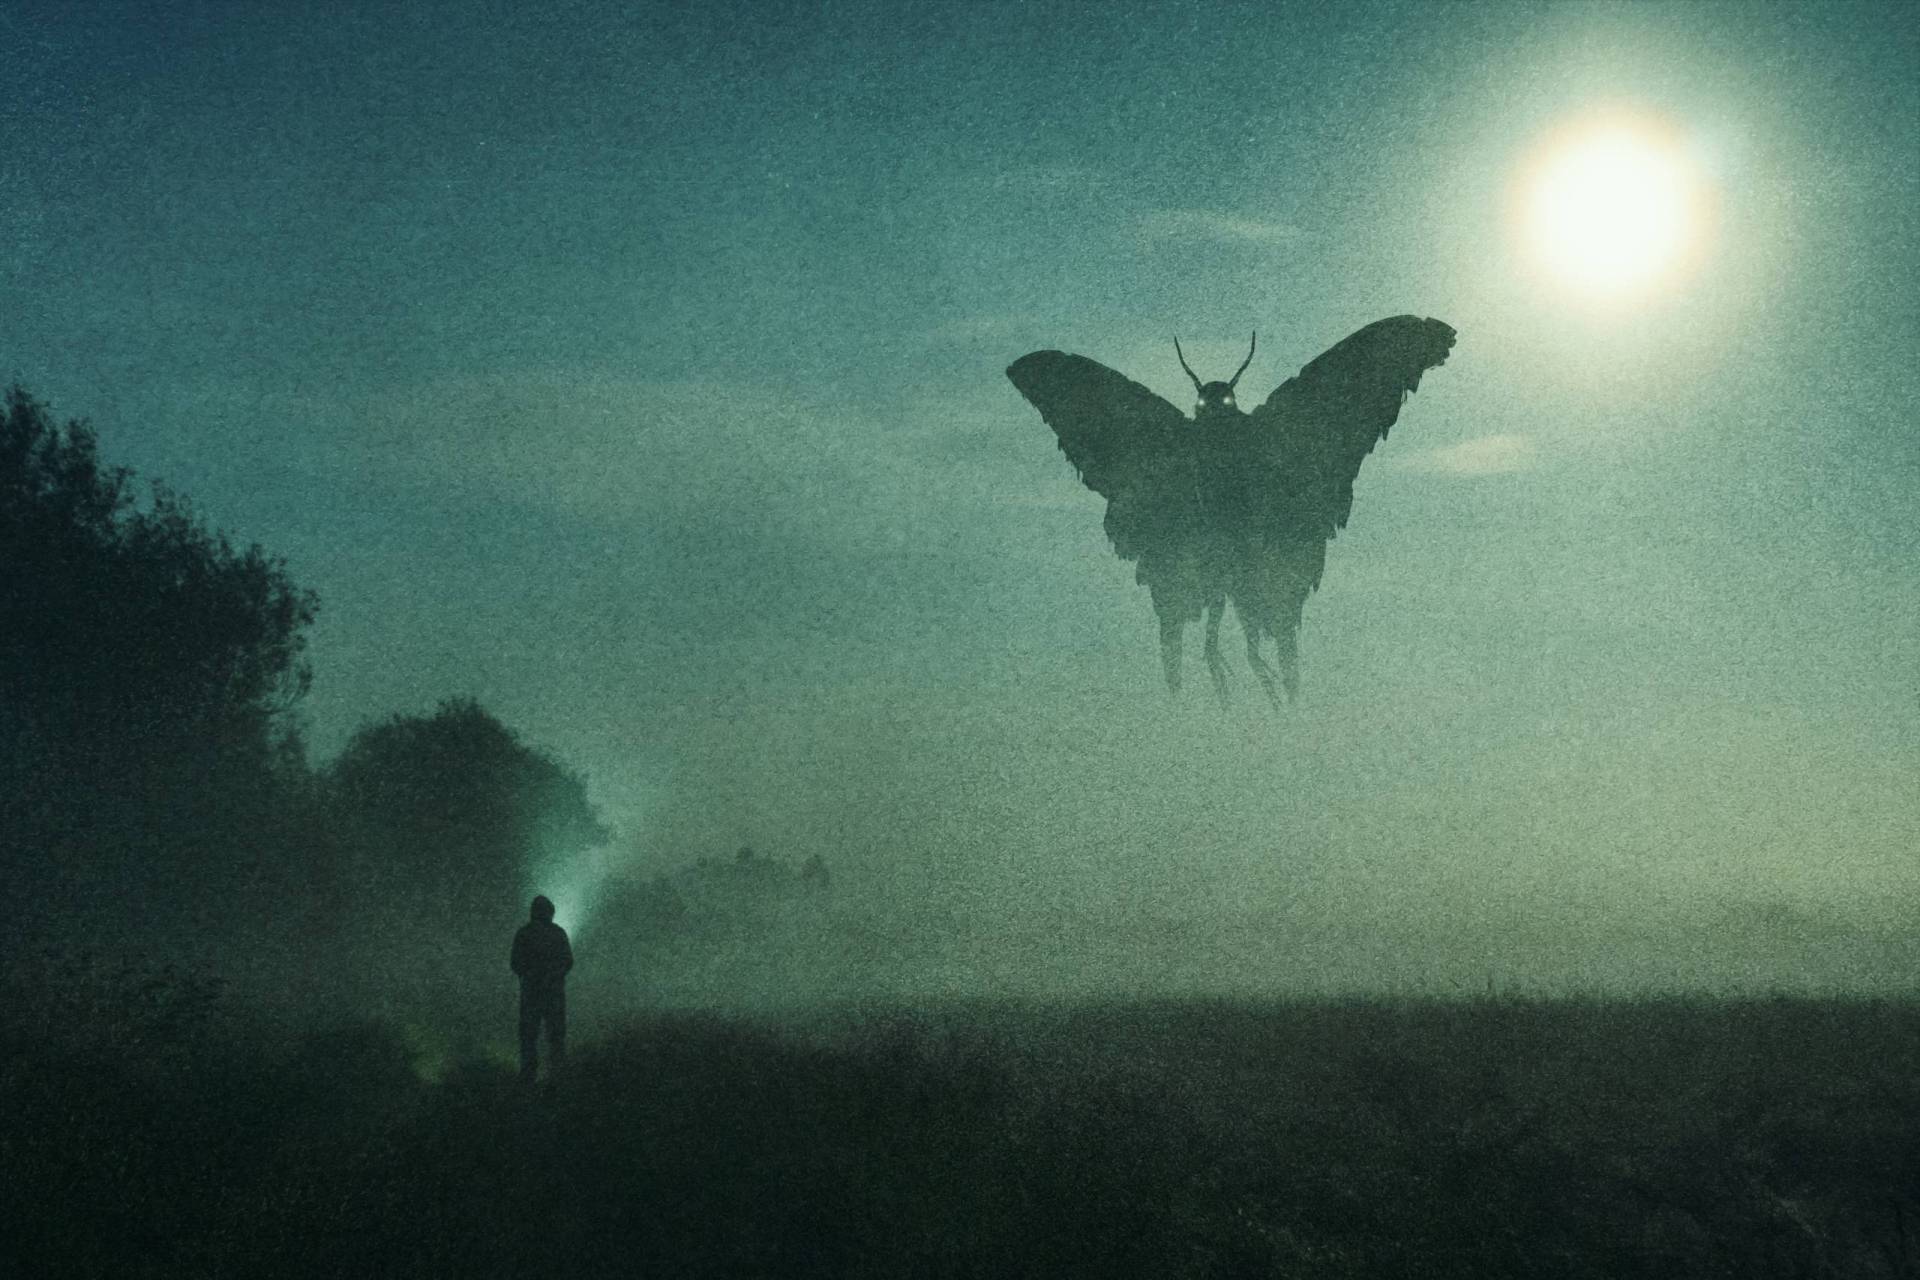 A man looks up at a flying mothman figure in the sky that's silhouetted against the moon at night.